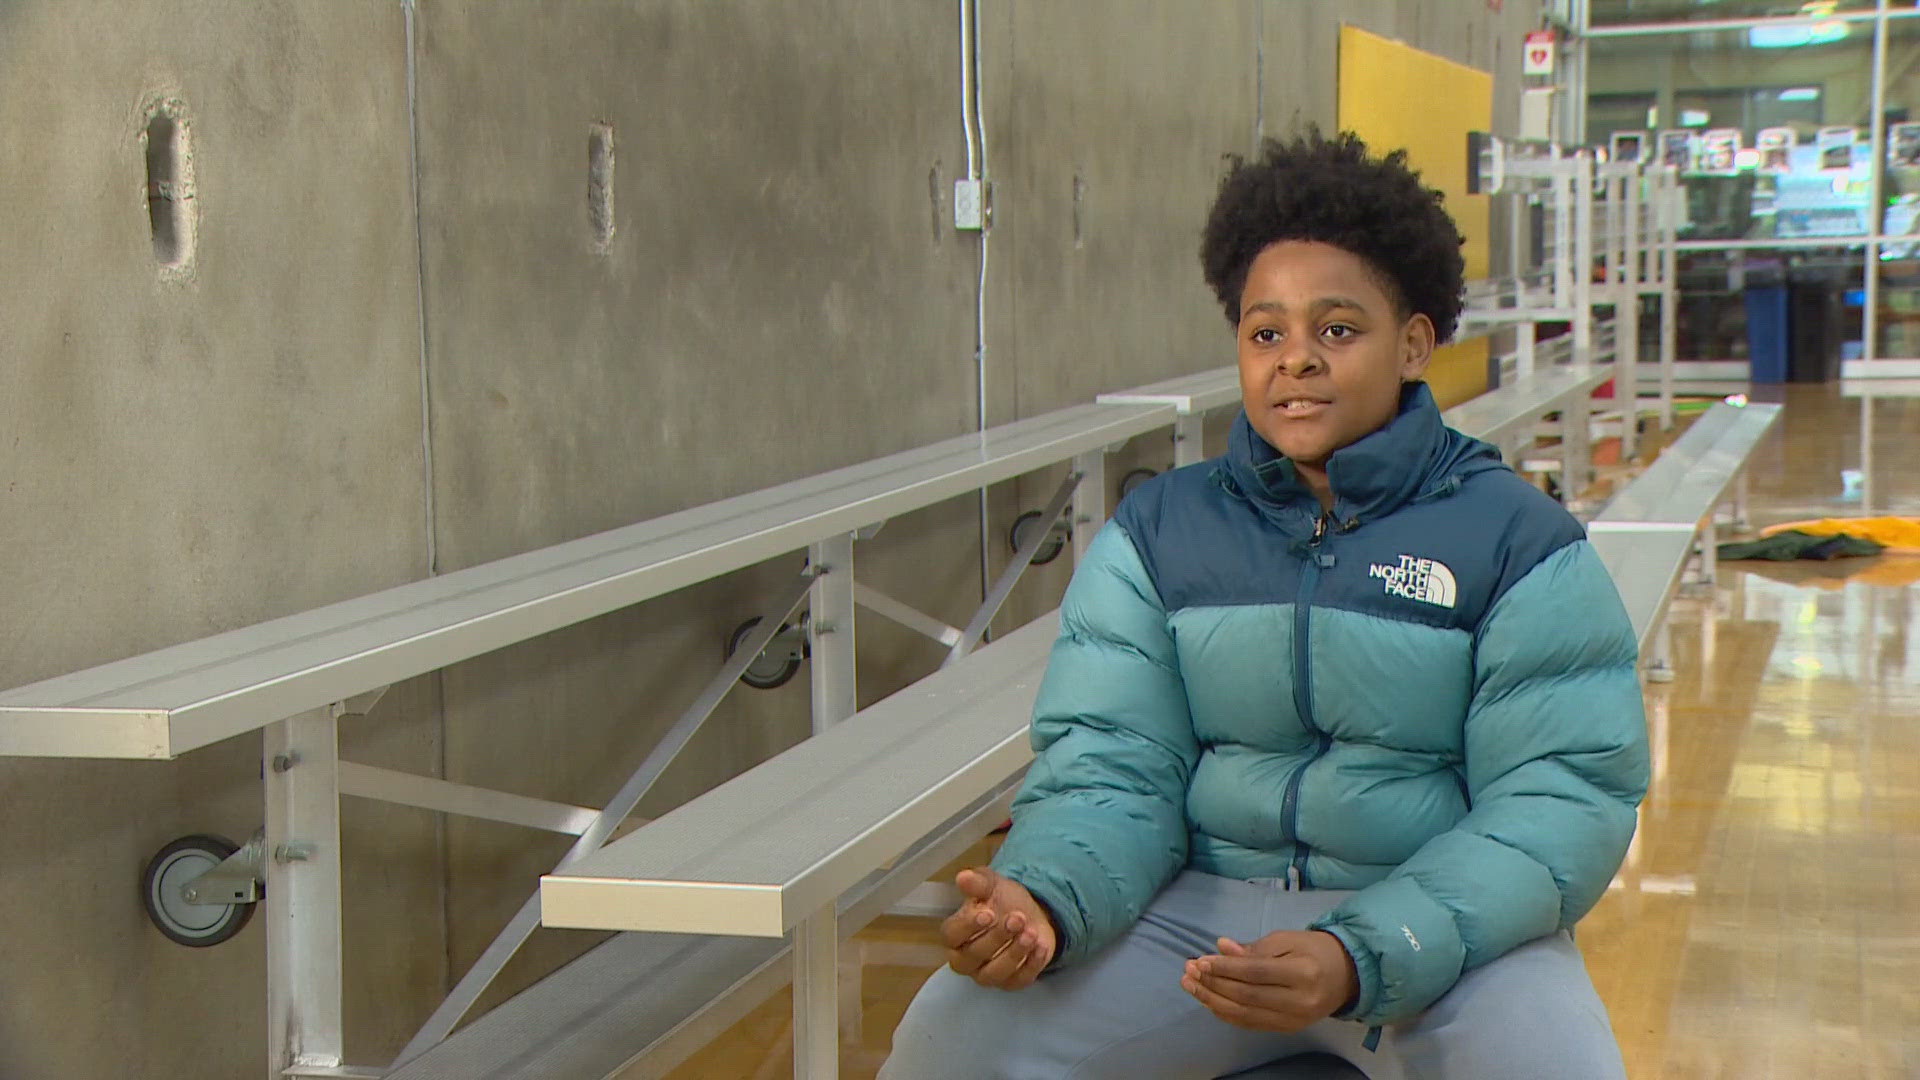 Members of the Boys & Girls Clubs of King County say their experience has helped them navigate life, while their peers get mixed up with trouble.